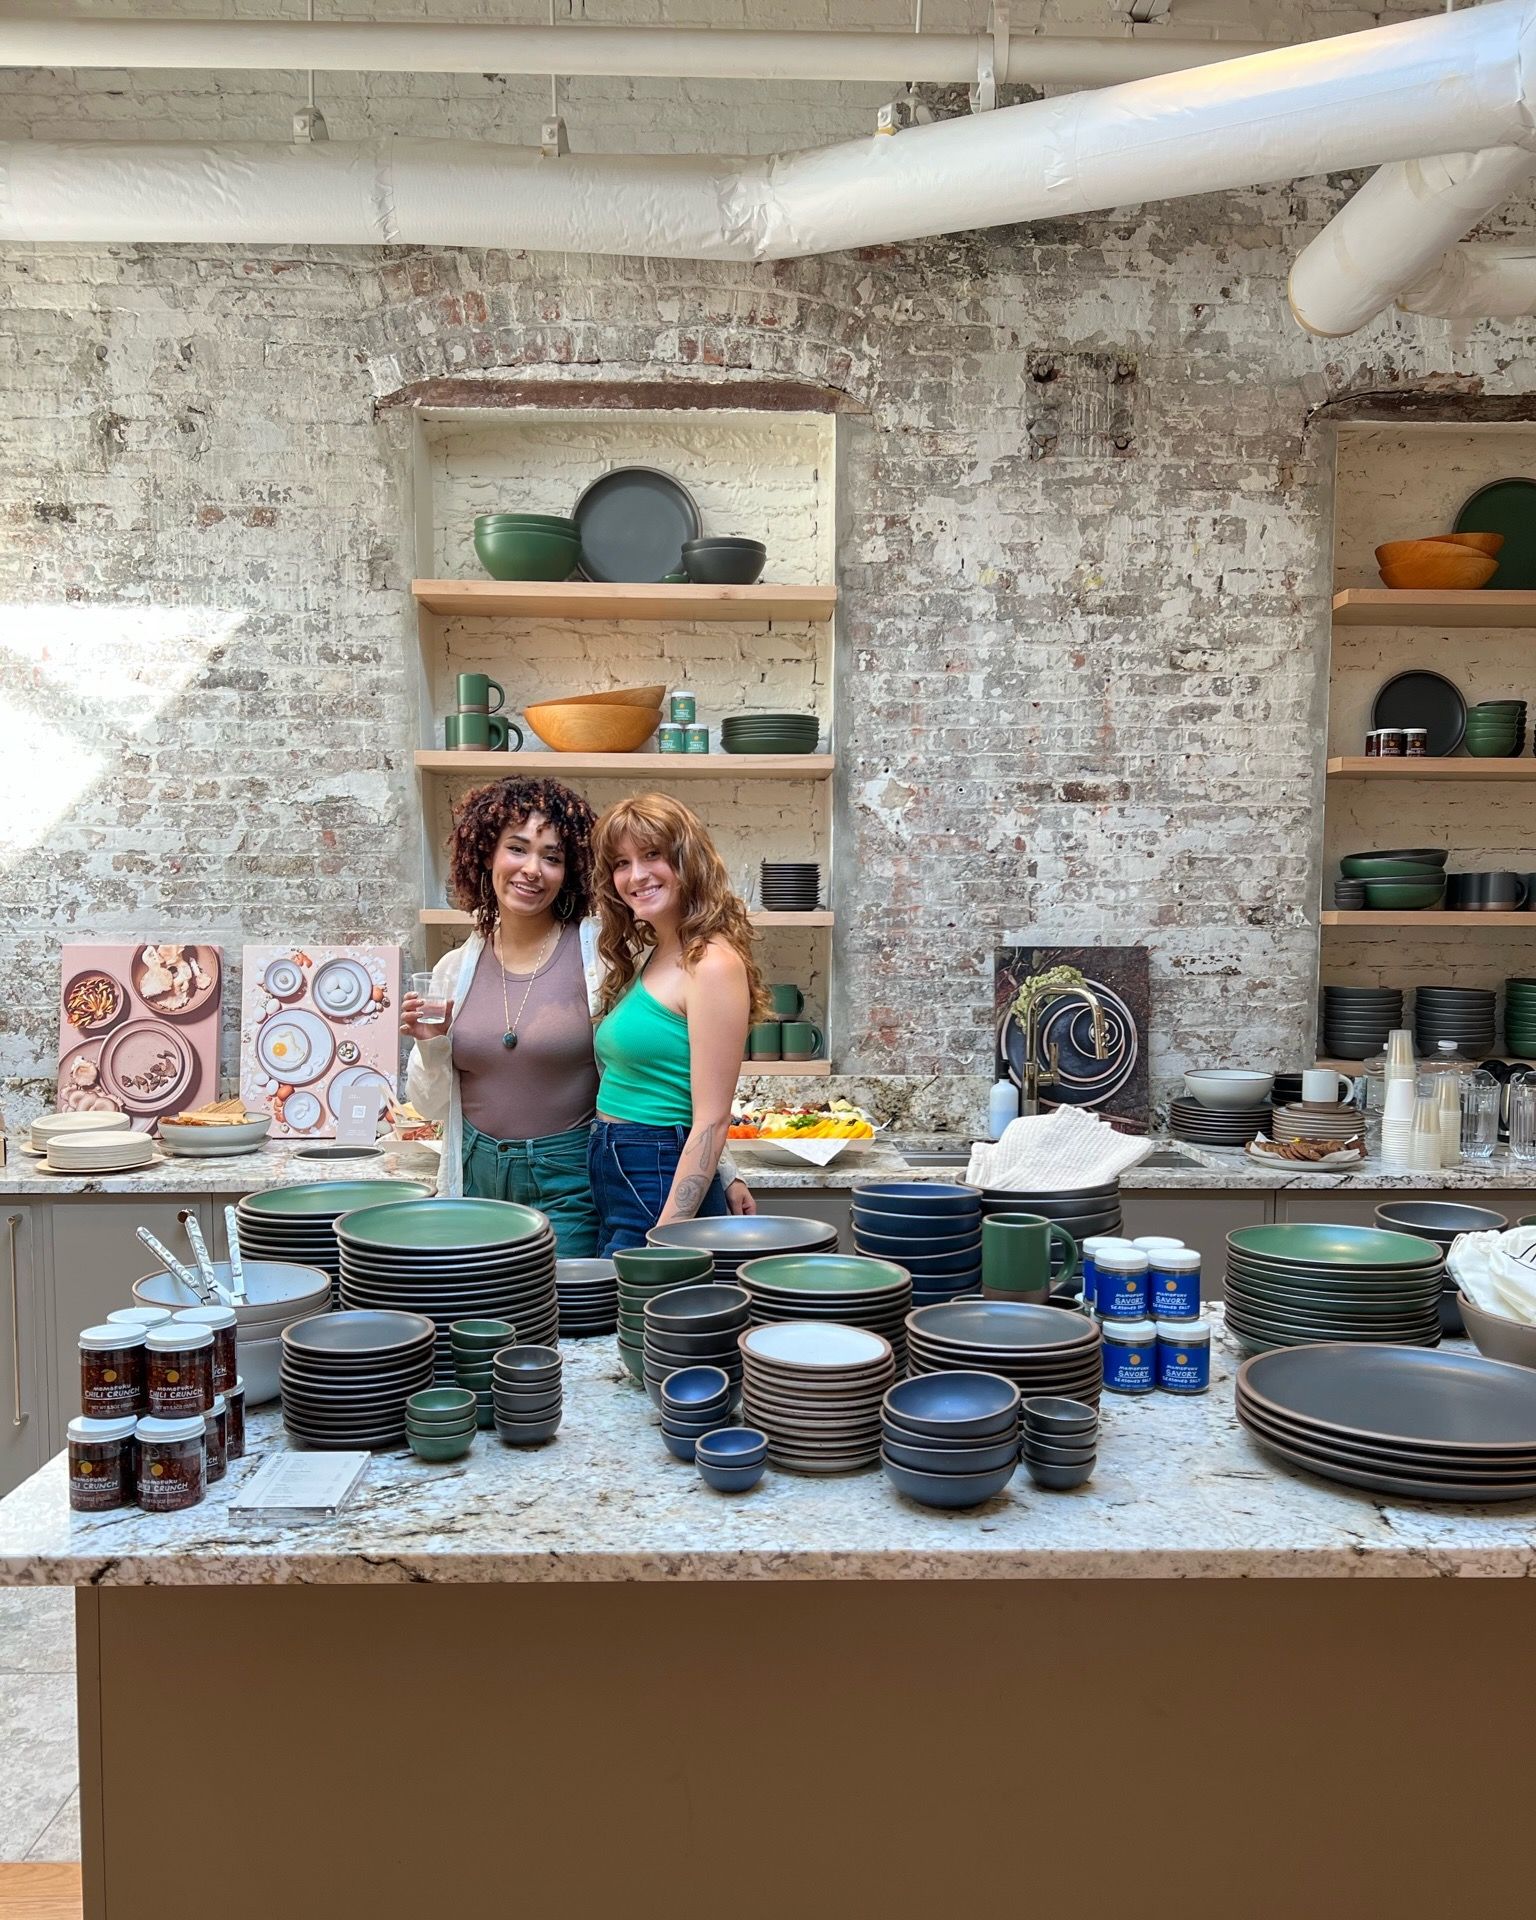 In a retail setting, 2 people are smiling at the camera surrounded by arranged stacks of ceramic bowls and plates merchandised for shopping.